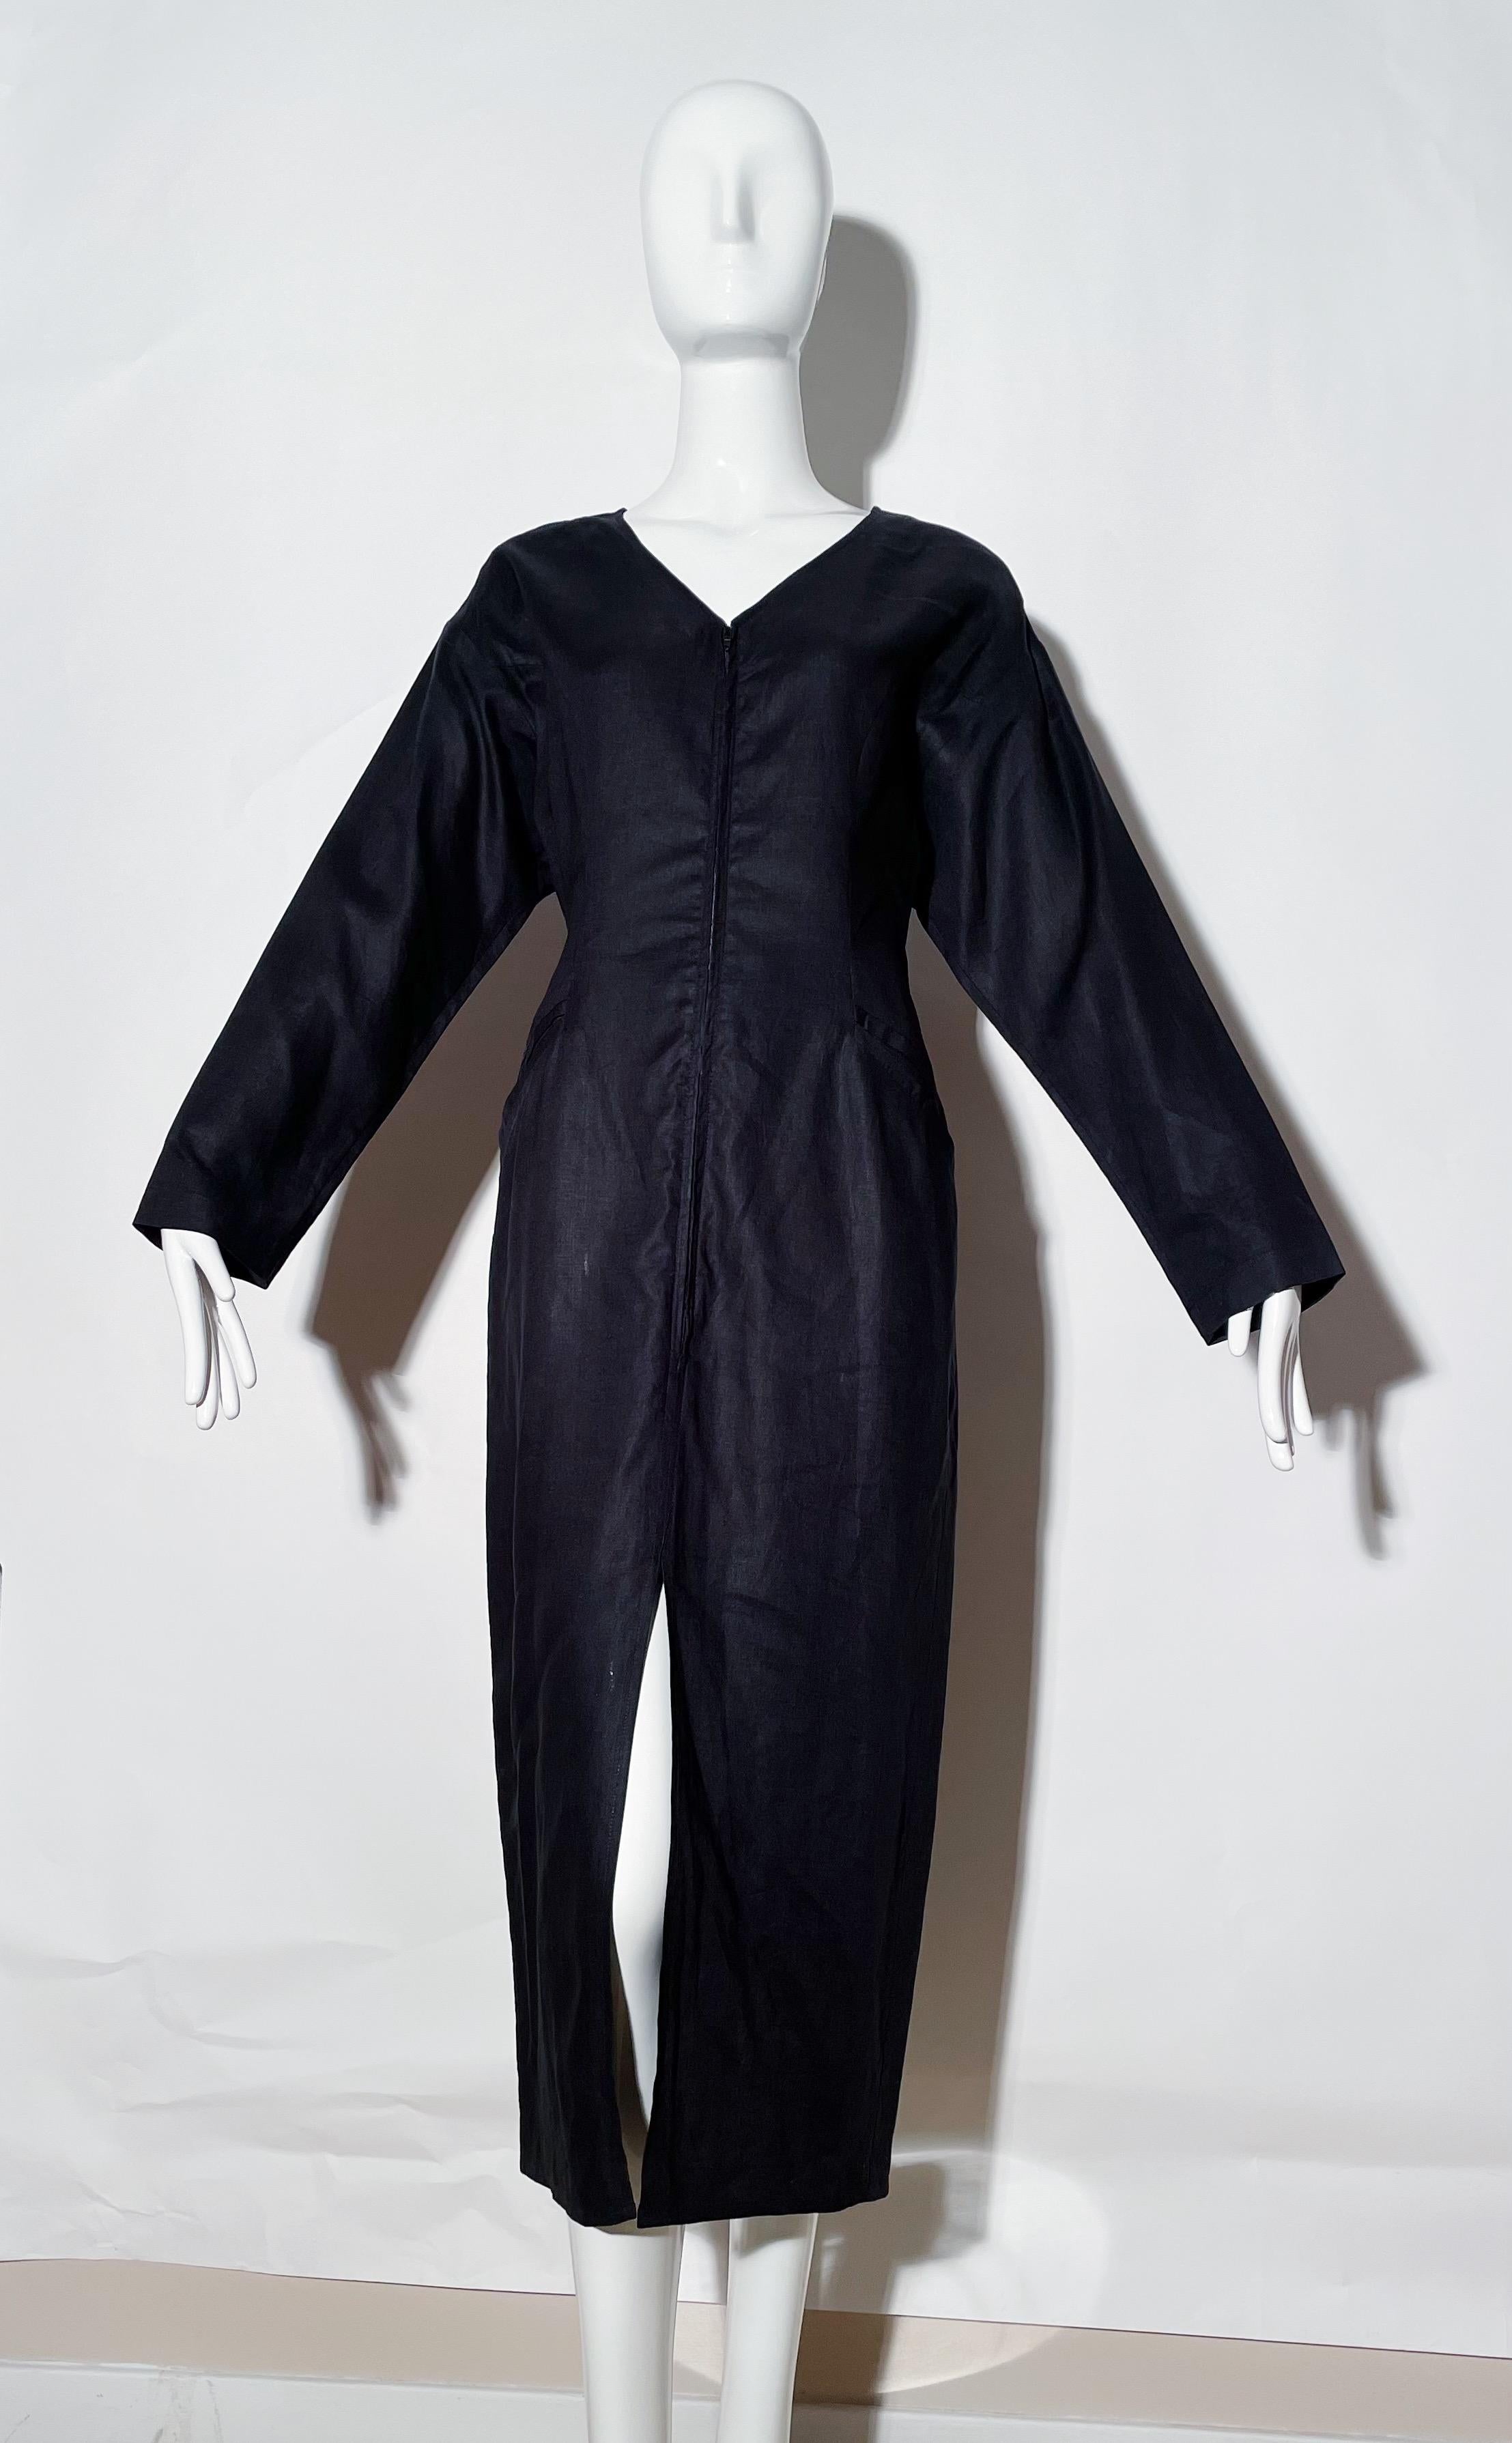 Black linen dress. V-neck. Long sleeve. Front zipper. Front pockets. Front slit. 
*Condition: excellent vintage condition. No visible flaws.

Measurements Taken Laying Flat (inches)—
Shoulder to Shoulder: 19 in.
Bust: 32 in.
Waist: 29 in.
Hip: 36